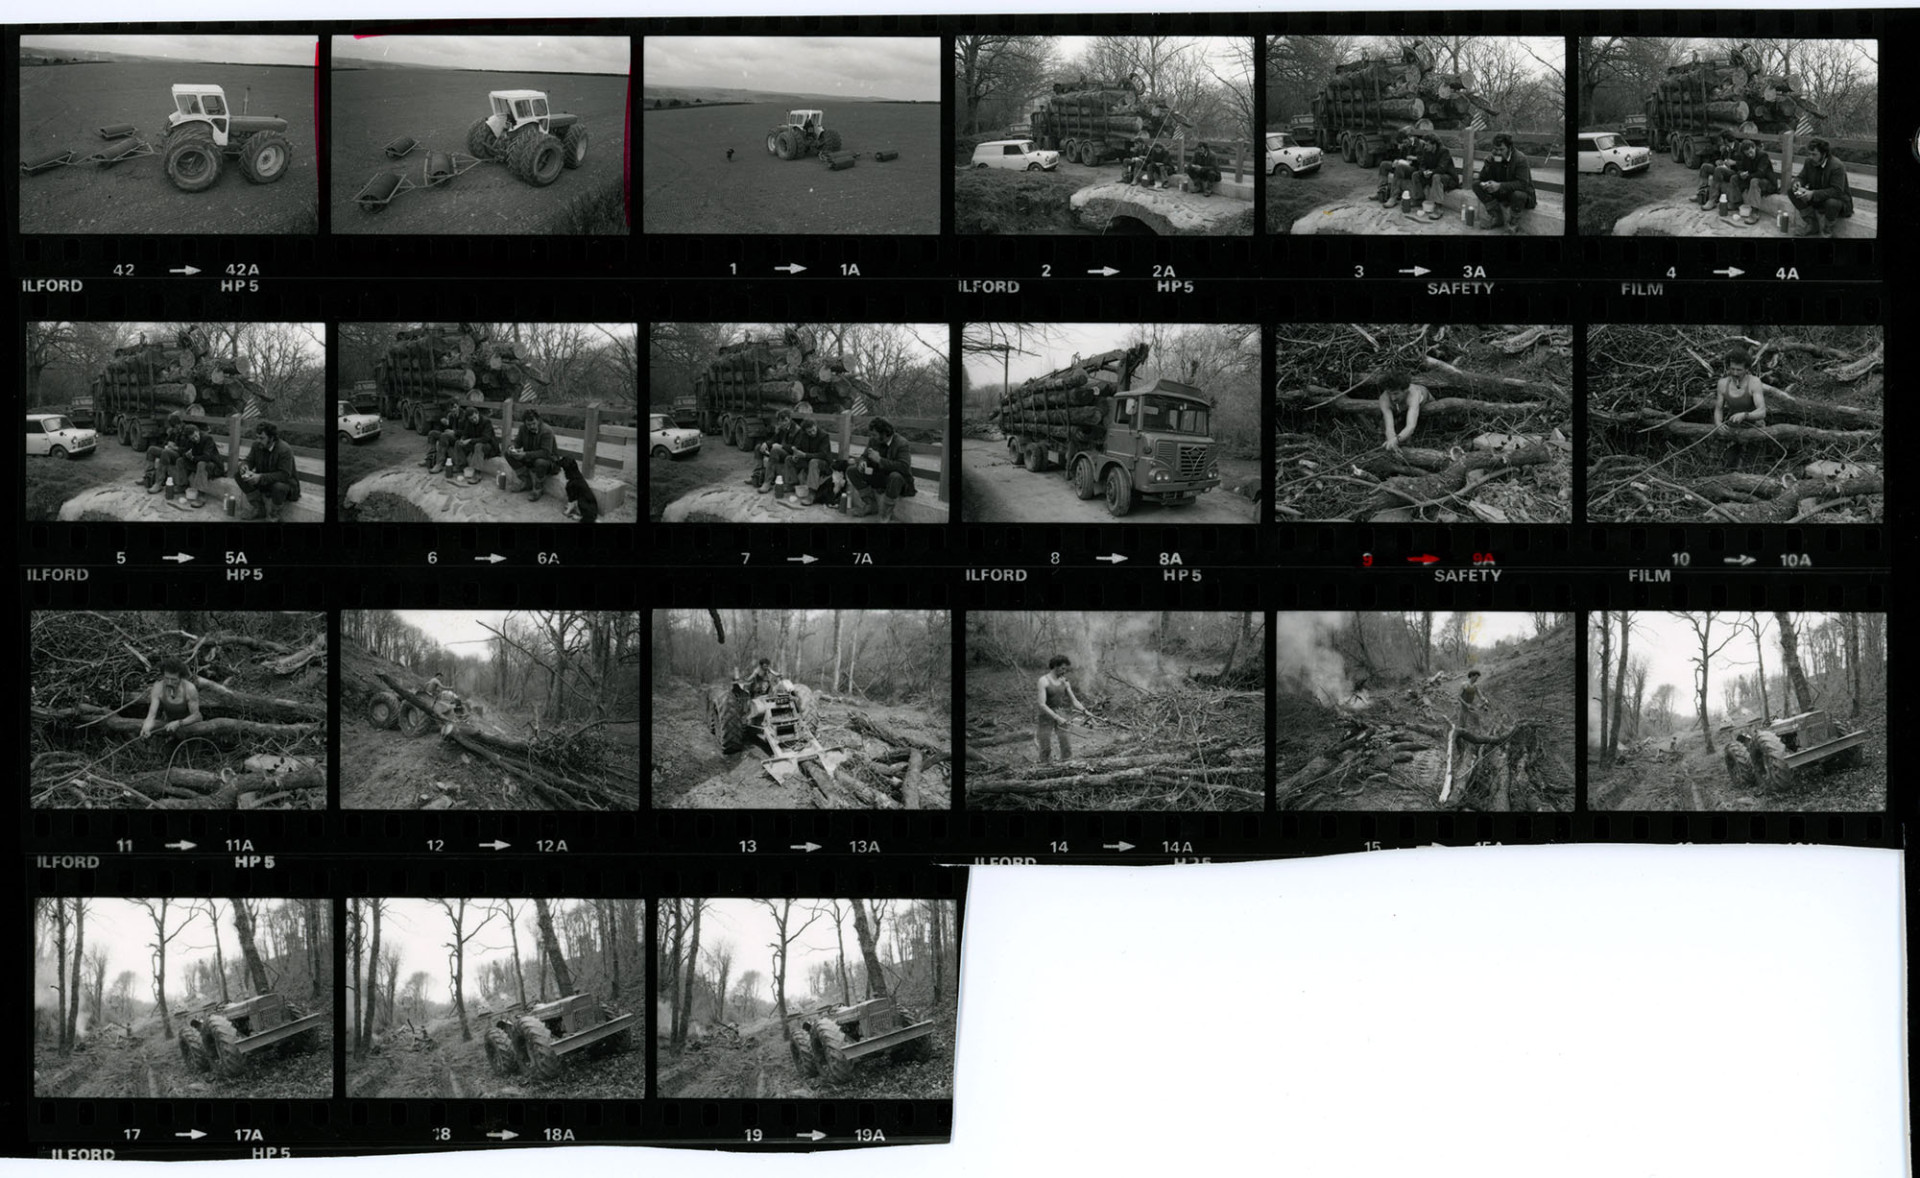 This contact sheet is in two parts. Both parts are shown on the same digital image. 
Part 1: Negative numbers 42 and 0-19. 
Part 2: Negative numbers 5B-7B.